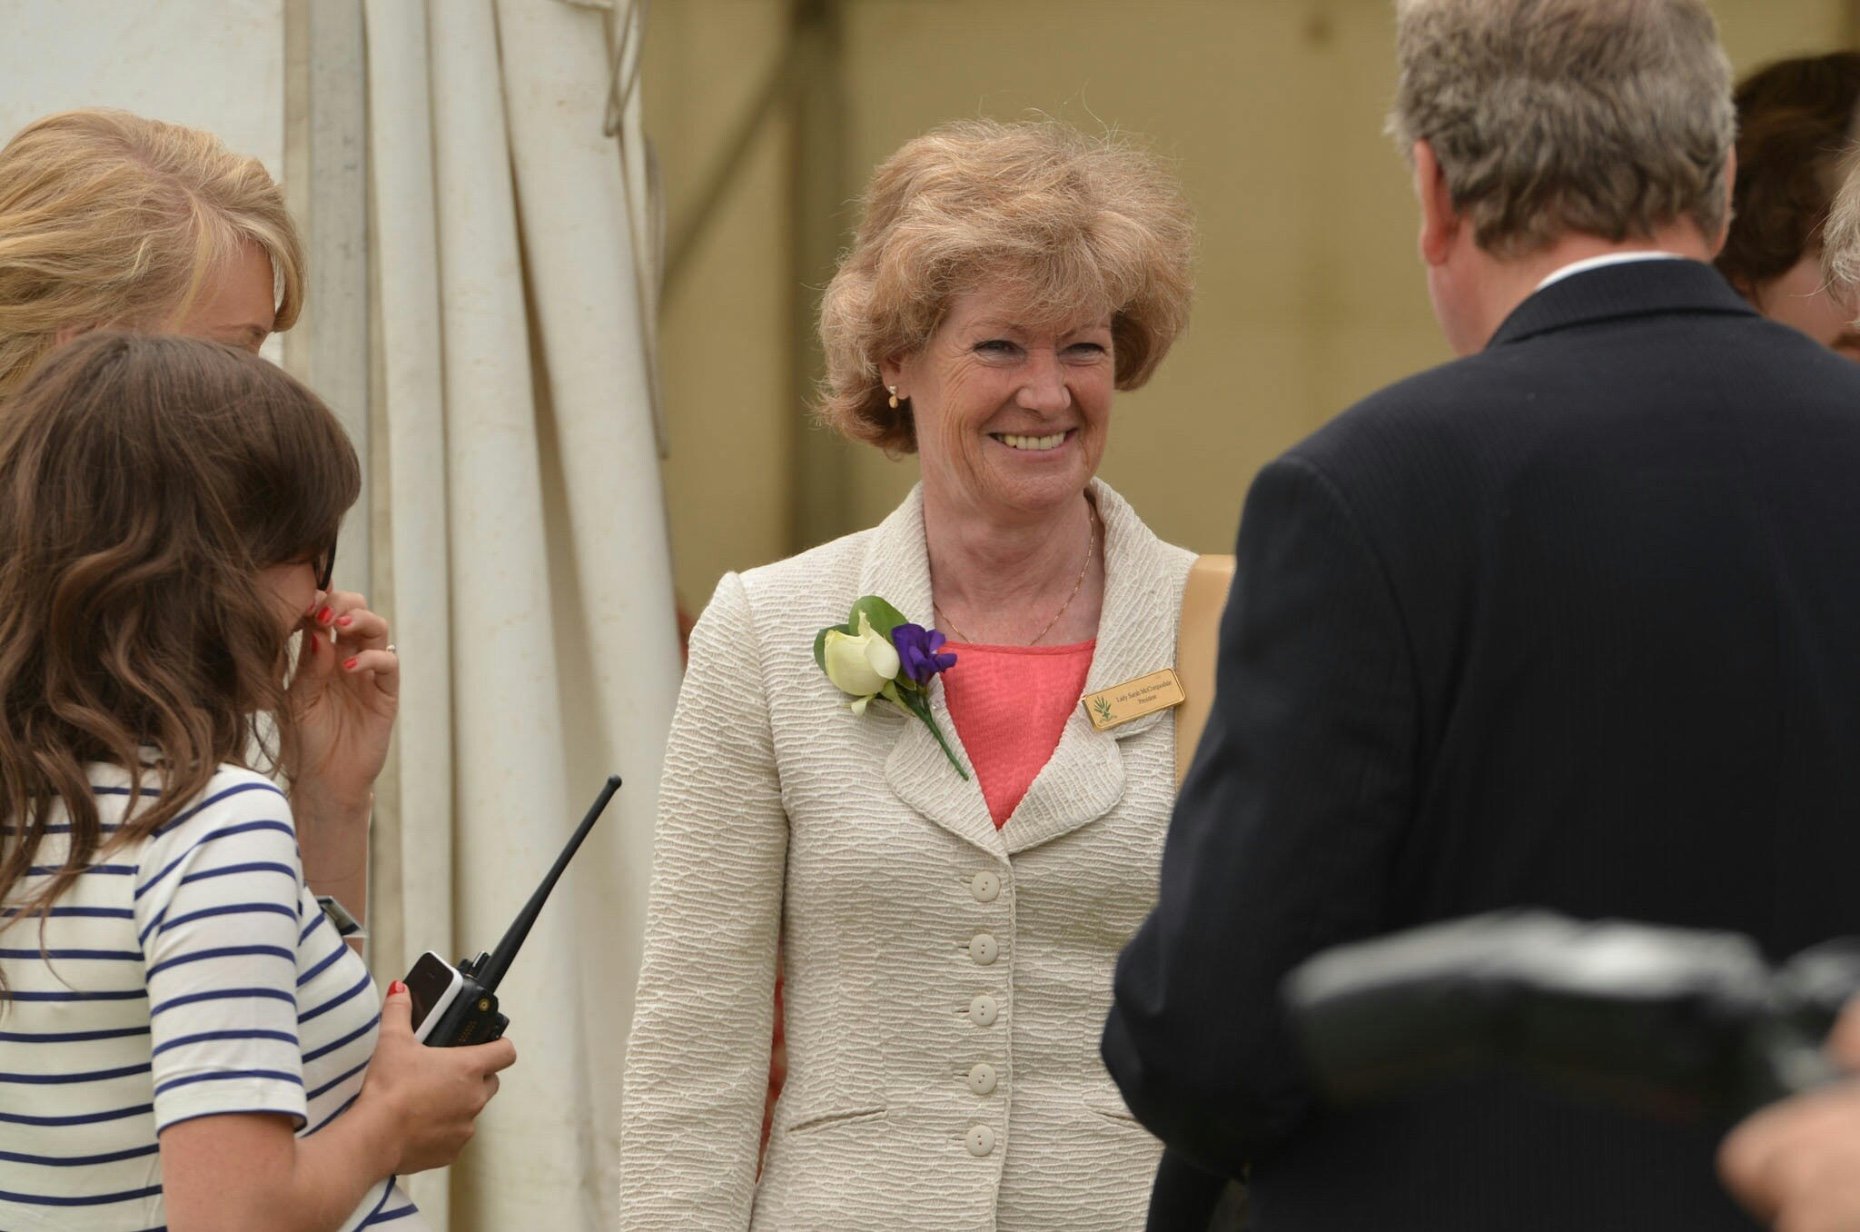 Lady Sarah McCorquodale, president of this year’s Lincolnshire Show. Photo: Steve Smailes for The Lincolnite